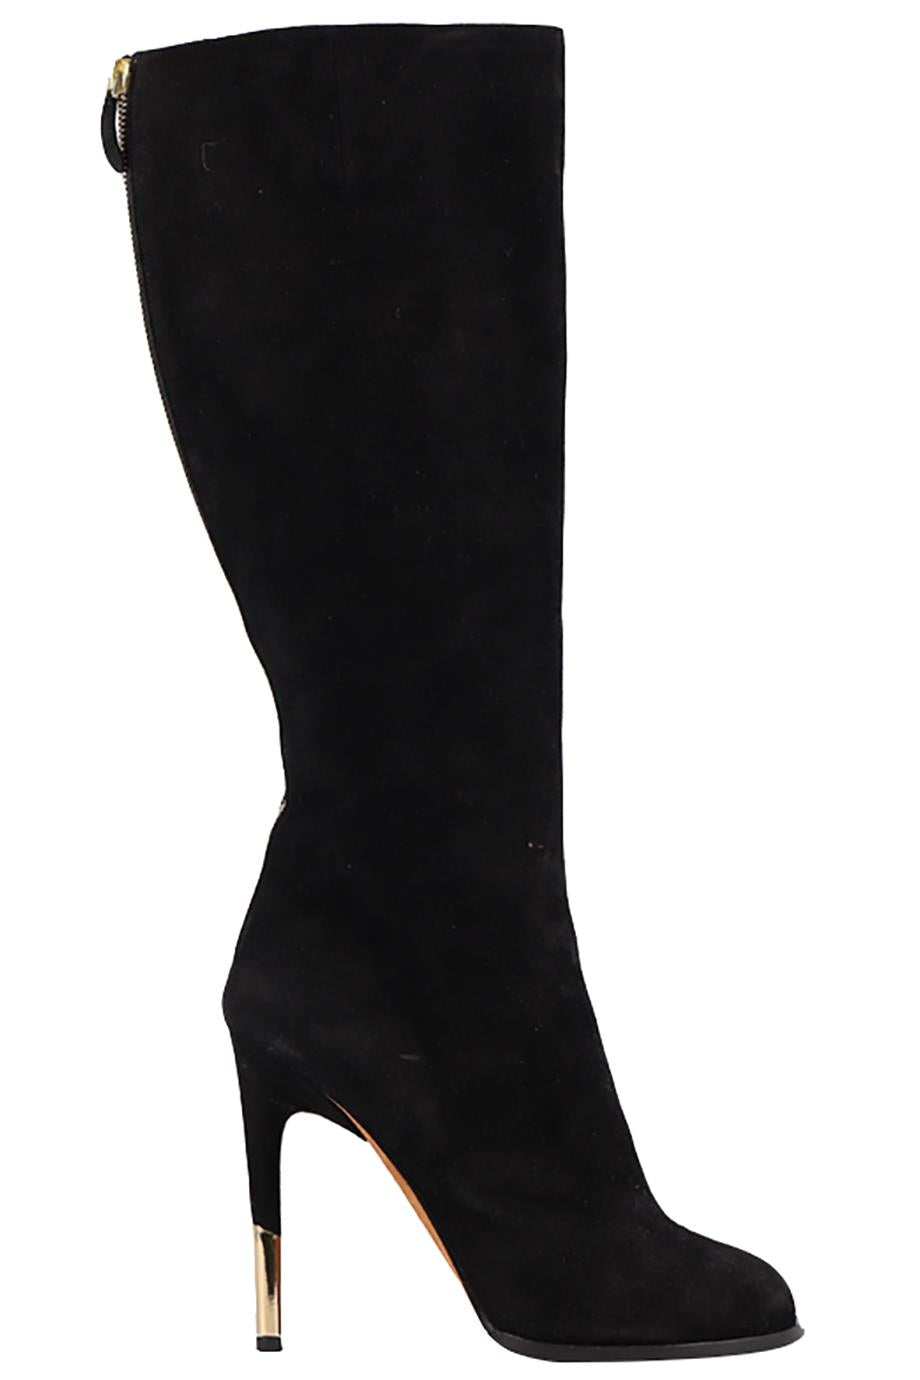 GIVENCHY SUEDE KNEE HIGH BOOTS EU 38.5 UK 5.5 US 8.5